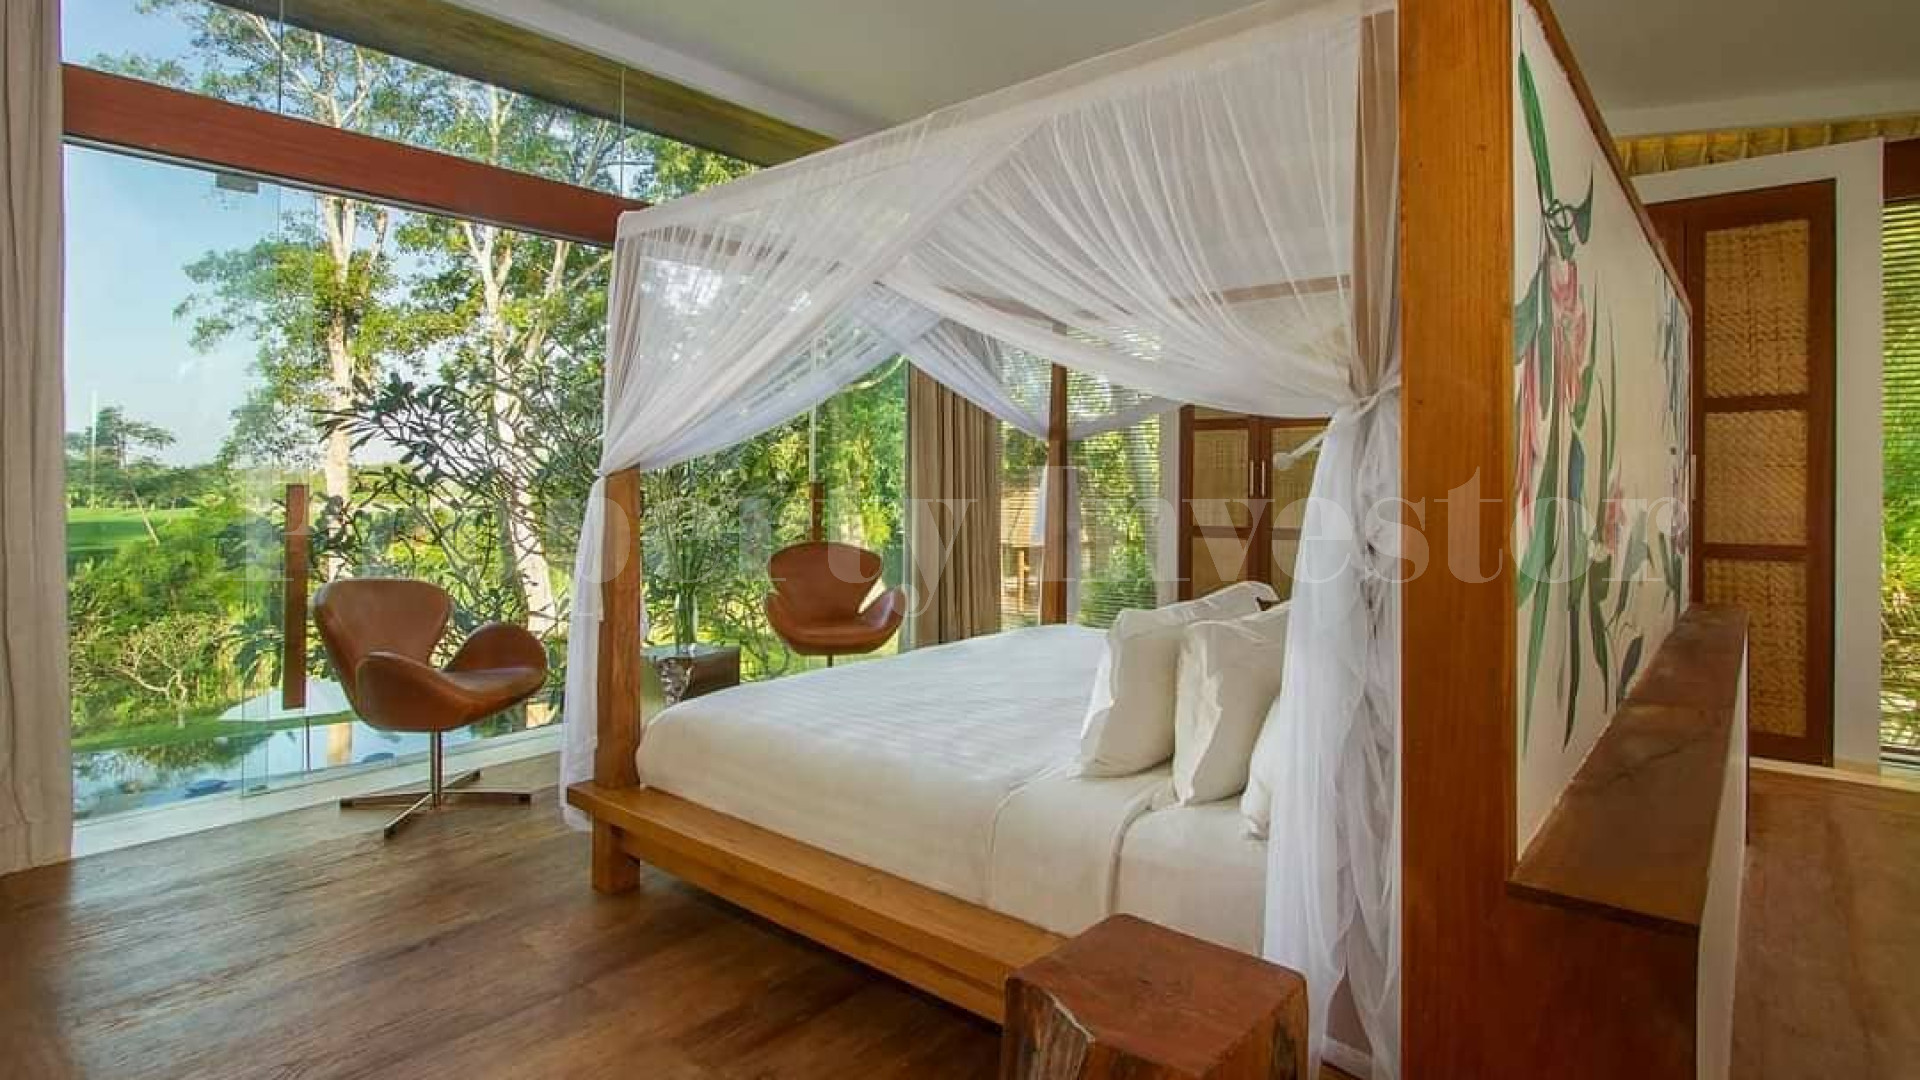 Lush 5 Bedroom Luxury Estate with Beautifully Groomed Gardens for Sale in Seseh Beach, Bali